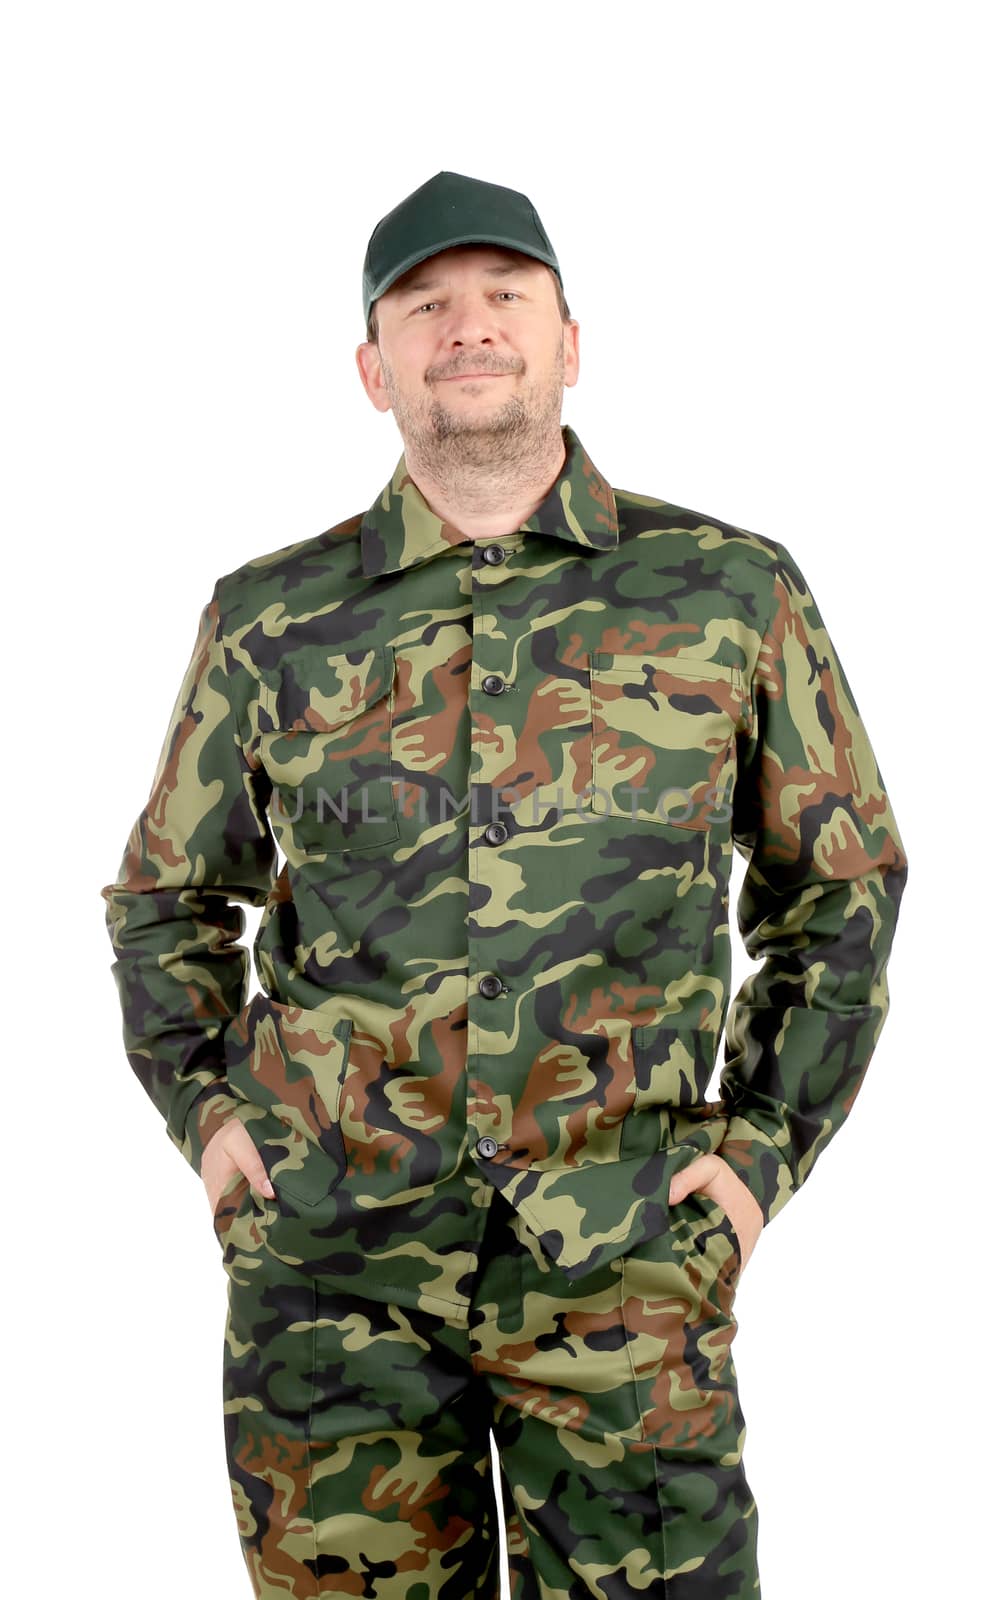 Man in military wear. by indigolotos